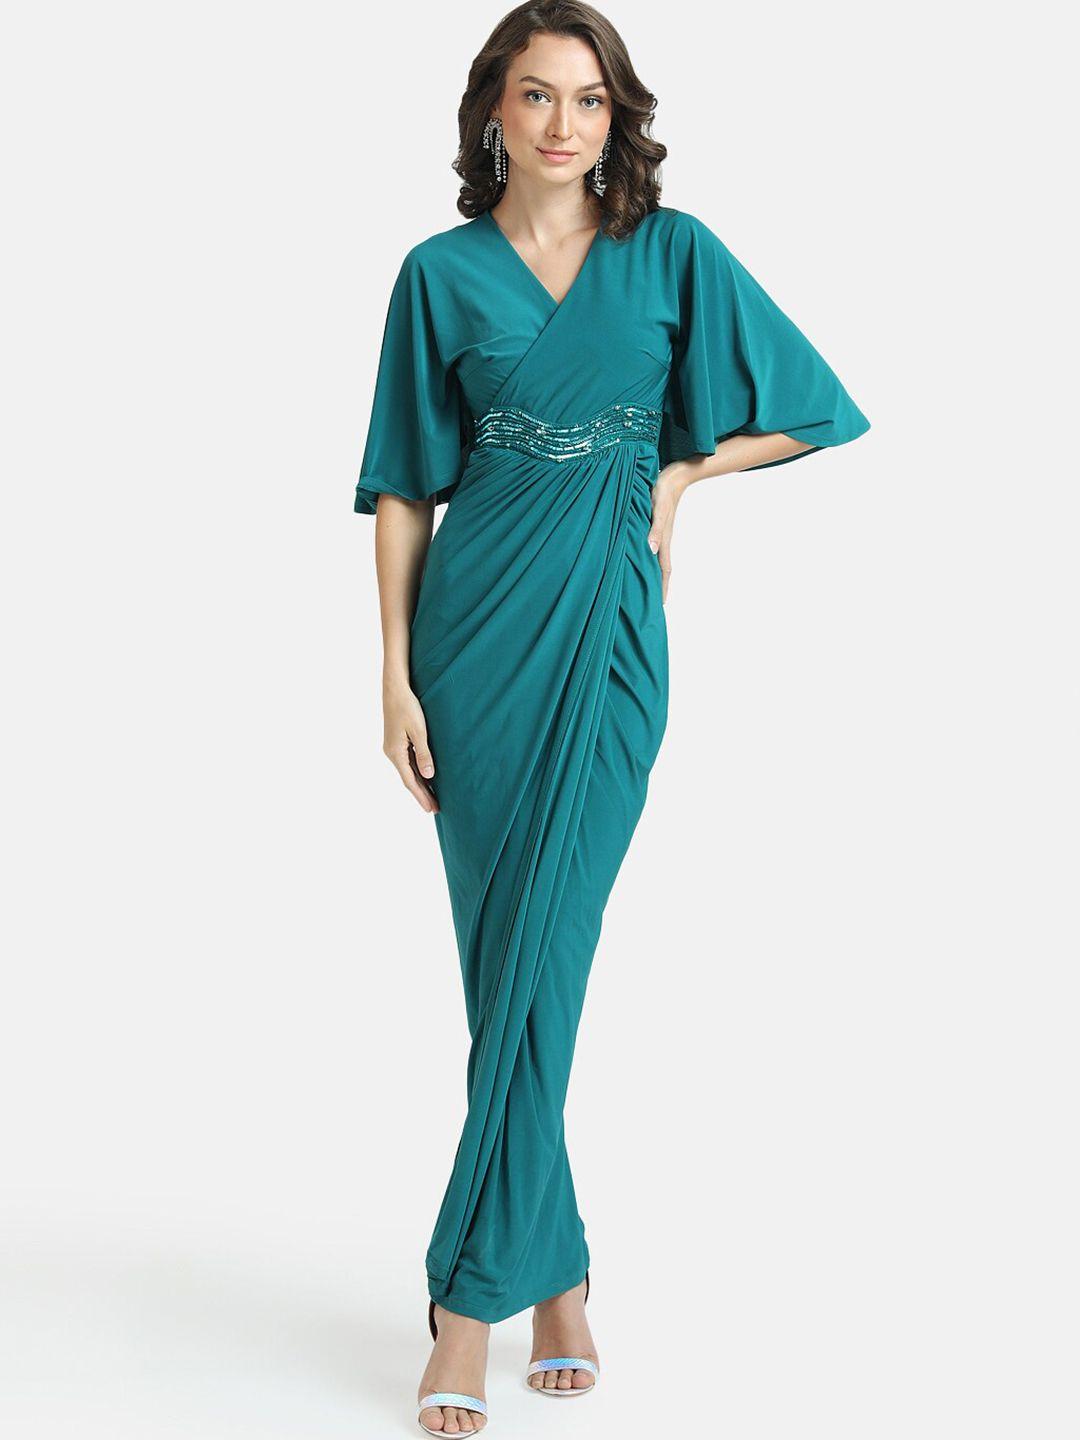 kazo-teal-green-embellished-extended-sleeves-maxi-dress